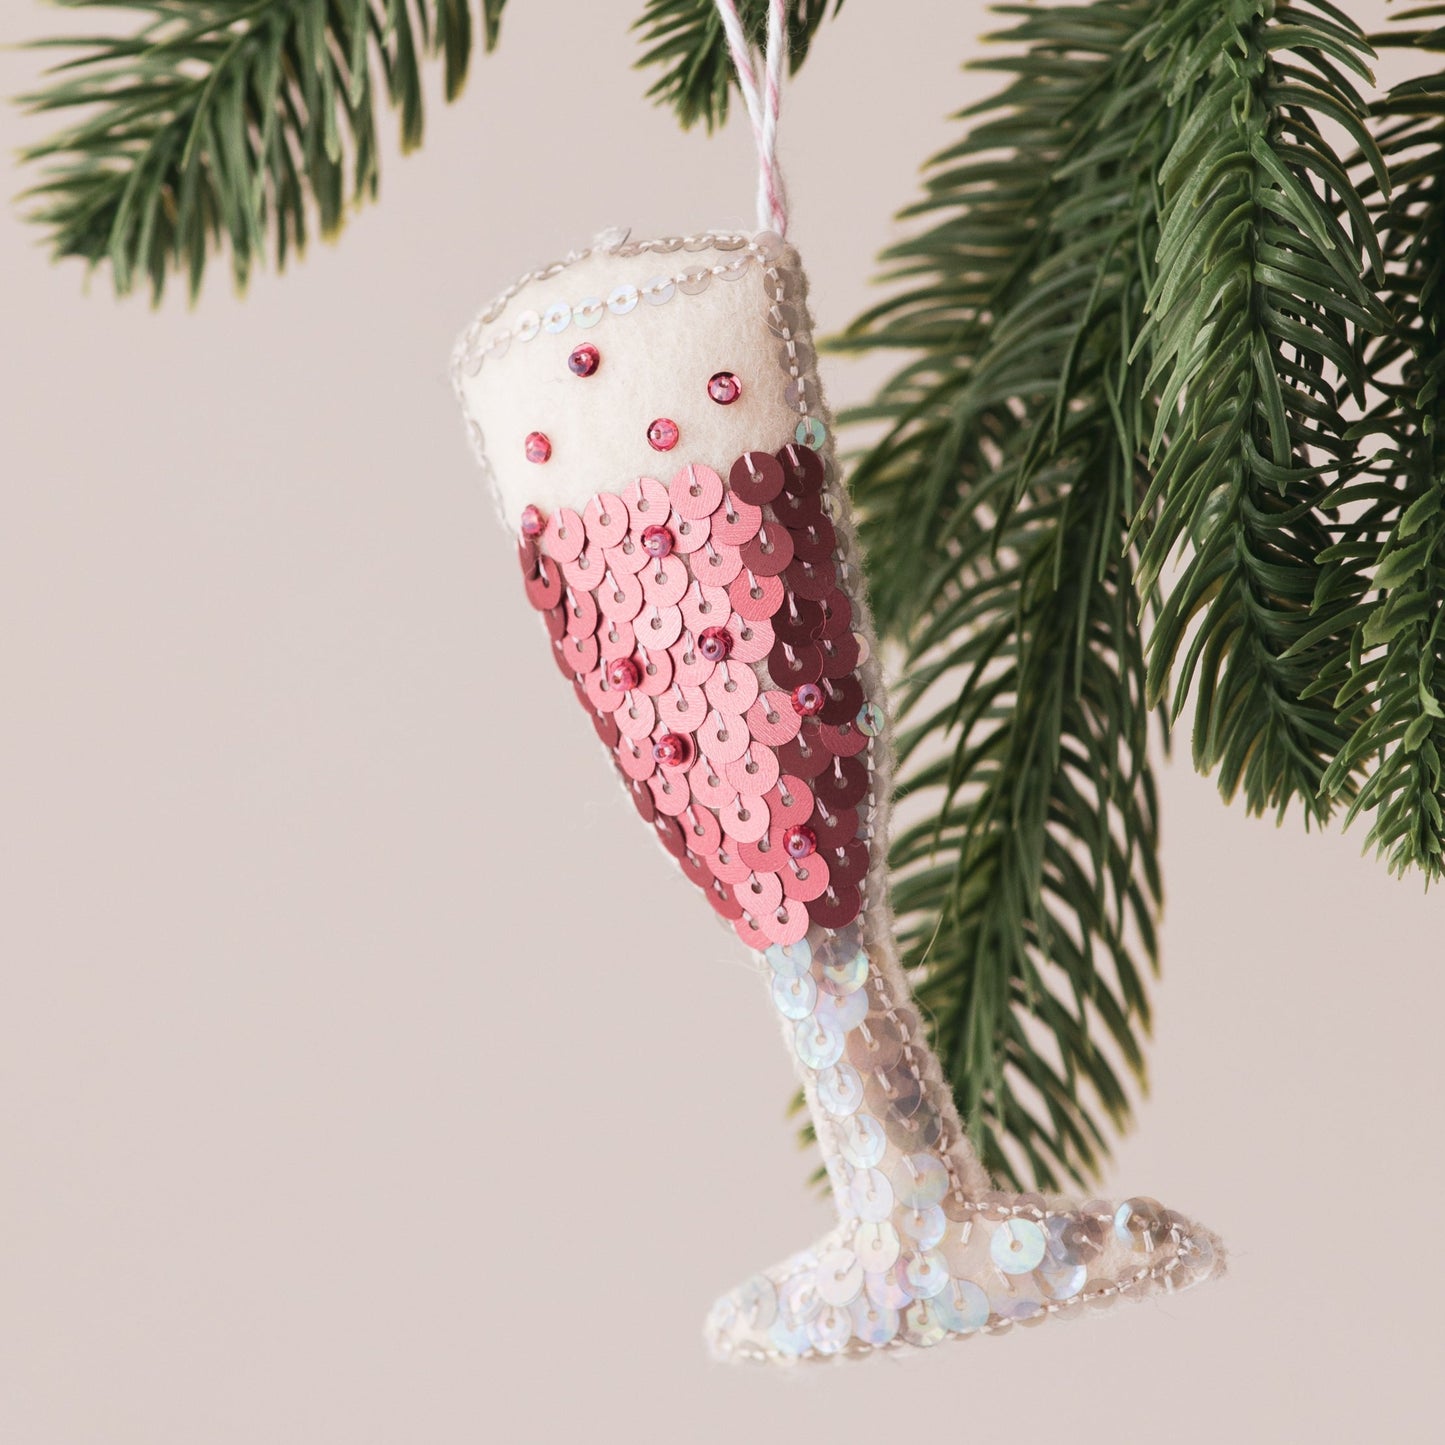 Pink champagne Flute Sequin Ornament, hanging on a tree